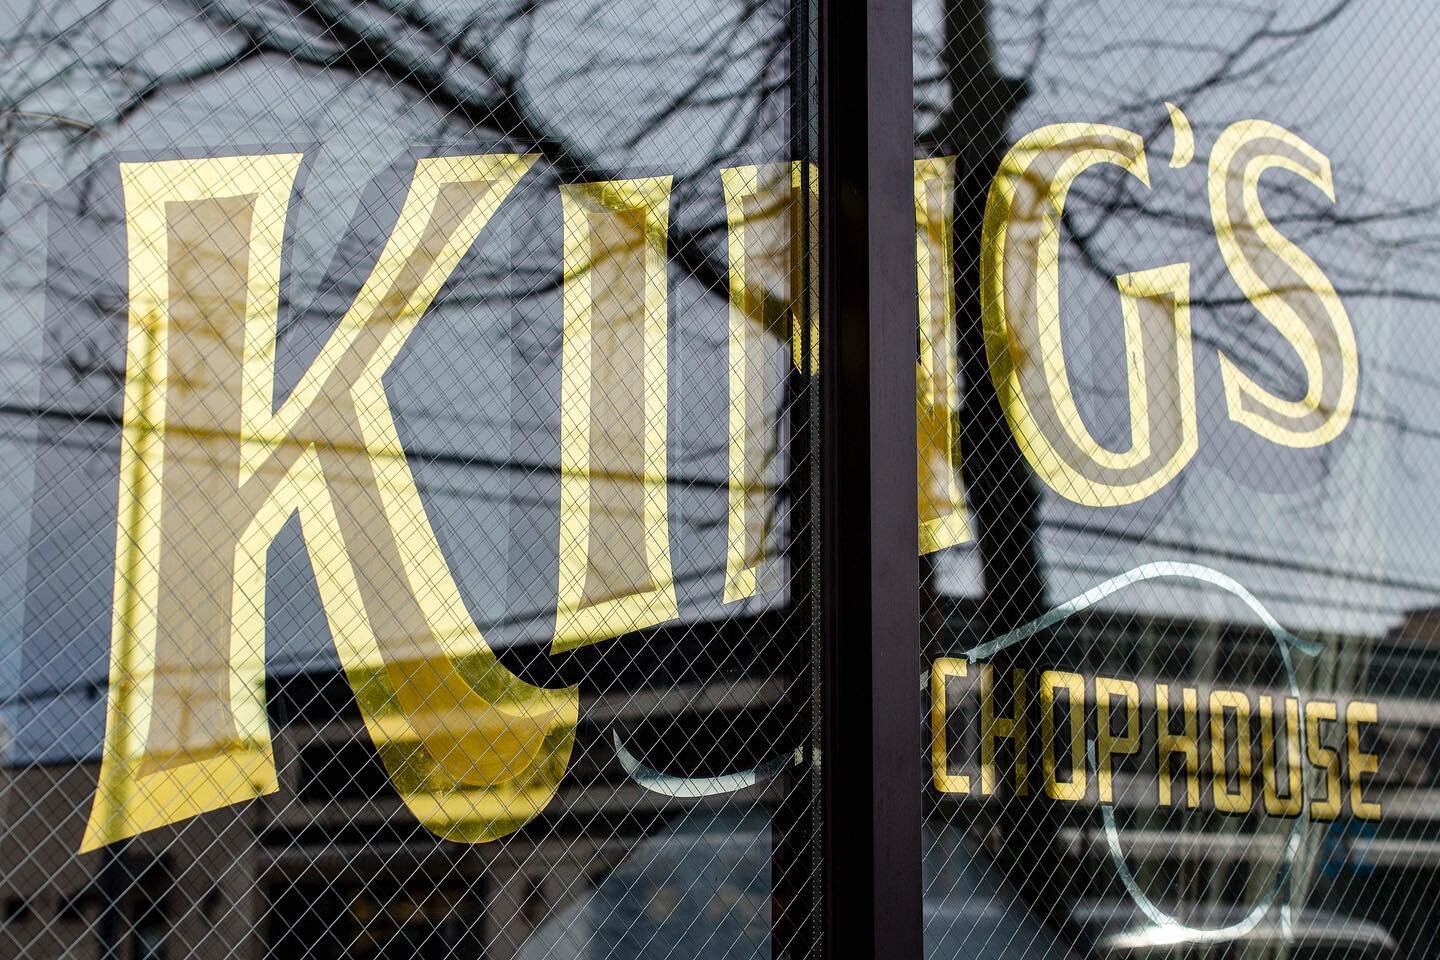 Rain or shine we are here! Come down and join us for dinner &amp; drinks! Dinner starts at 5 PM.
.
.
.
📸 : @gnarshredjab 
.
.
.
#kingschophouse #bayshore #longisland #newyork #dryaged #dryagedbeef #chophouse #steakhouse #farmtotable #seatotable #mea